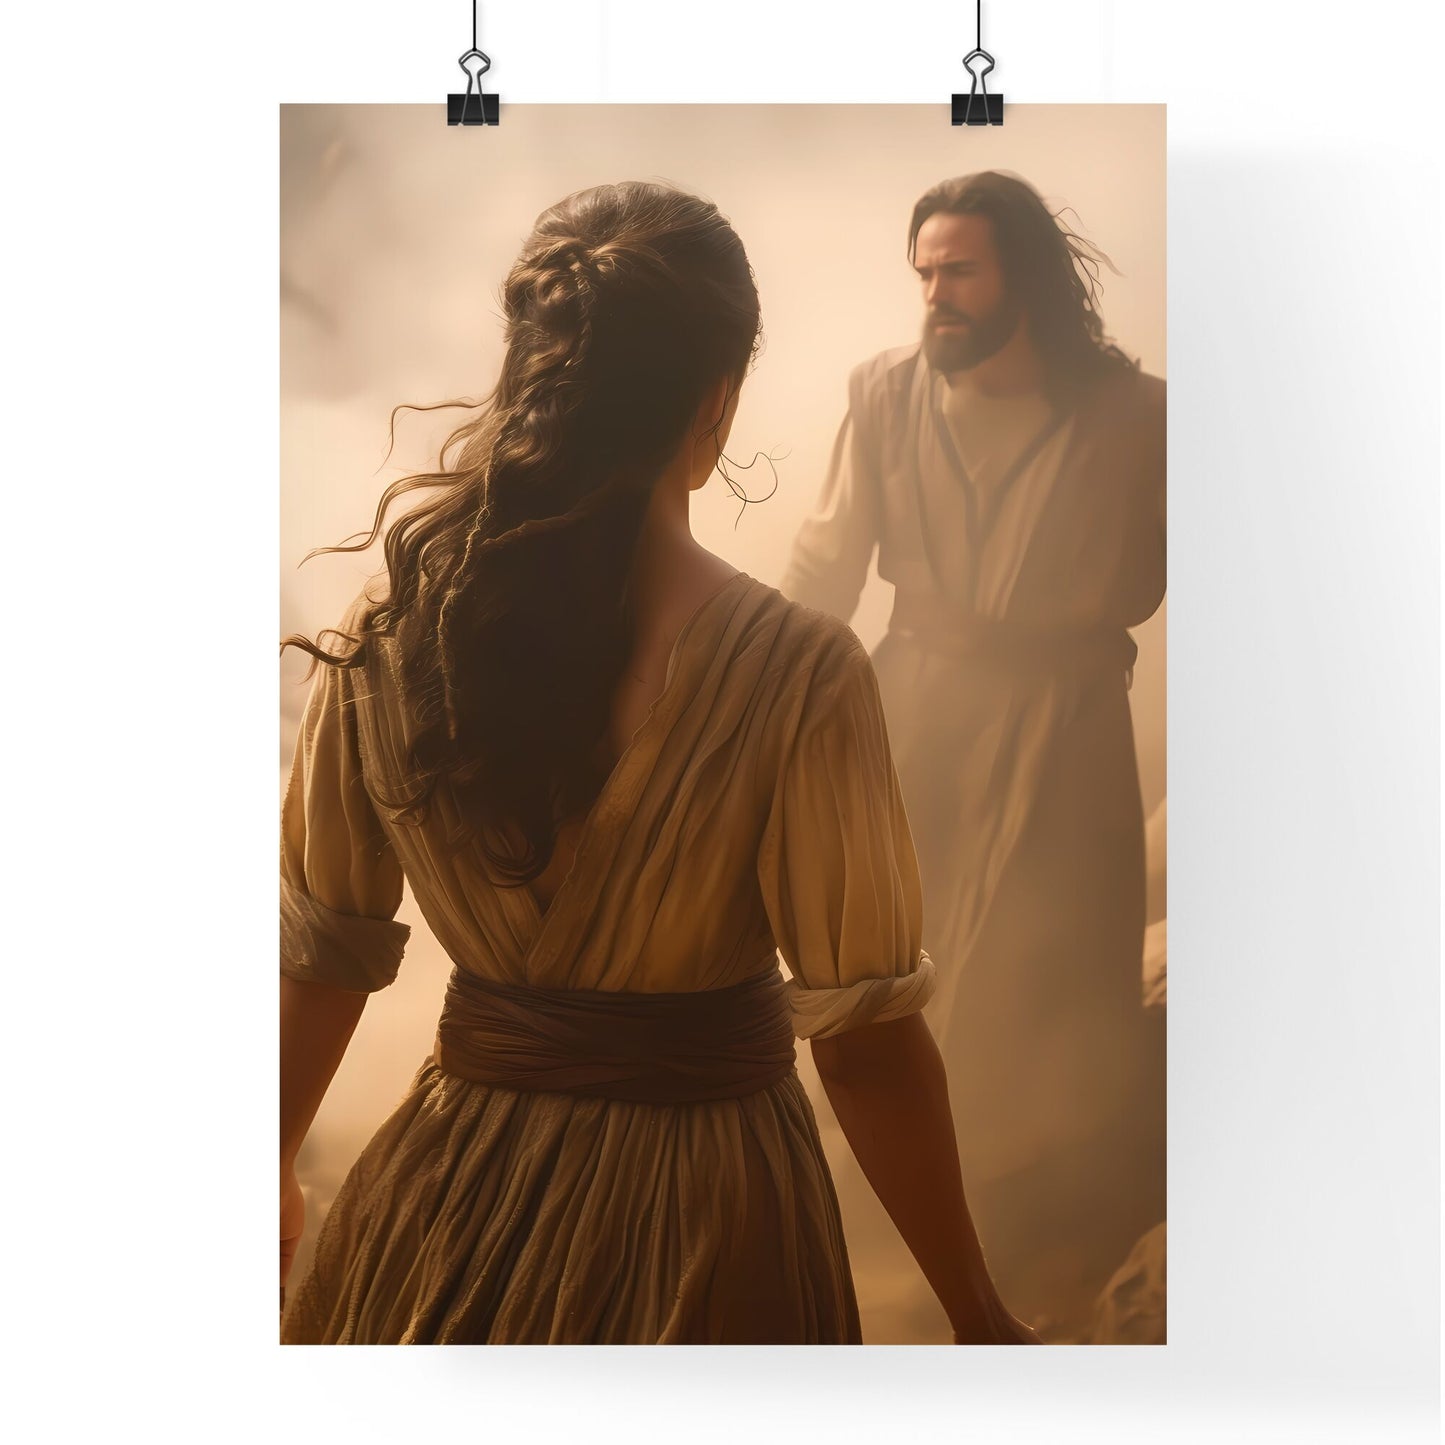 We see the back of young woman with dark wavy hair wearing a brown dress is running toward Jesus a man with dark long hair and a brown rugged robe - Art print of a woman in a long dress looking at a man in a foggy environment Default Title